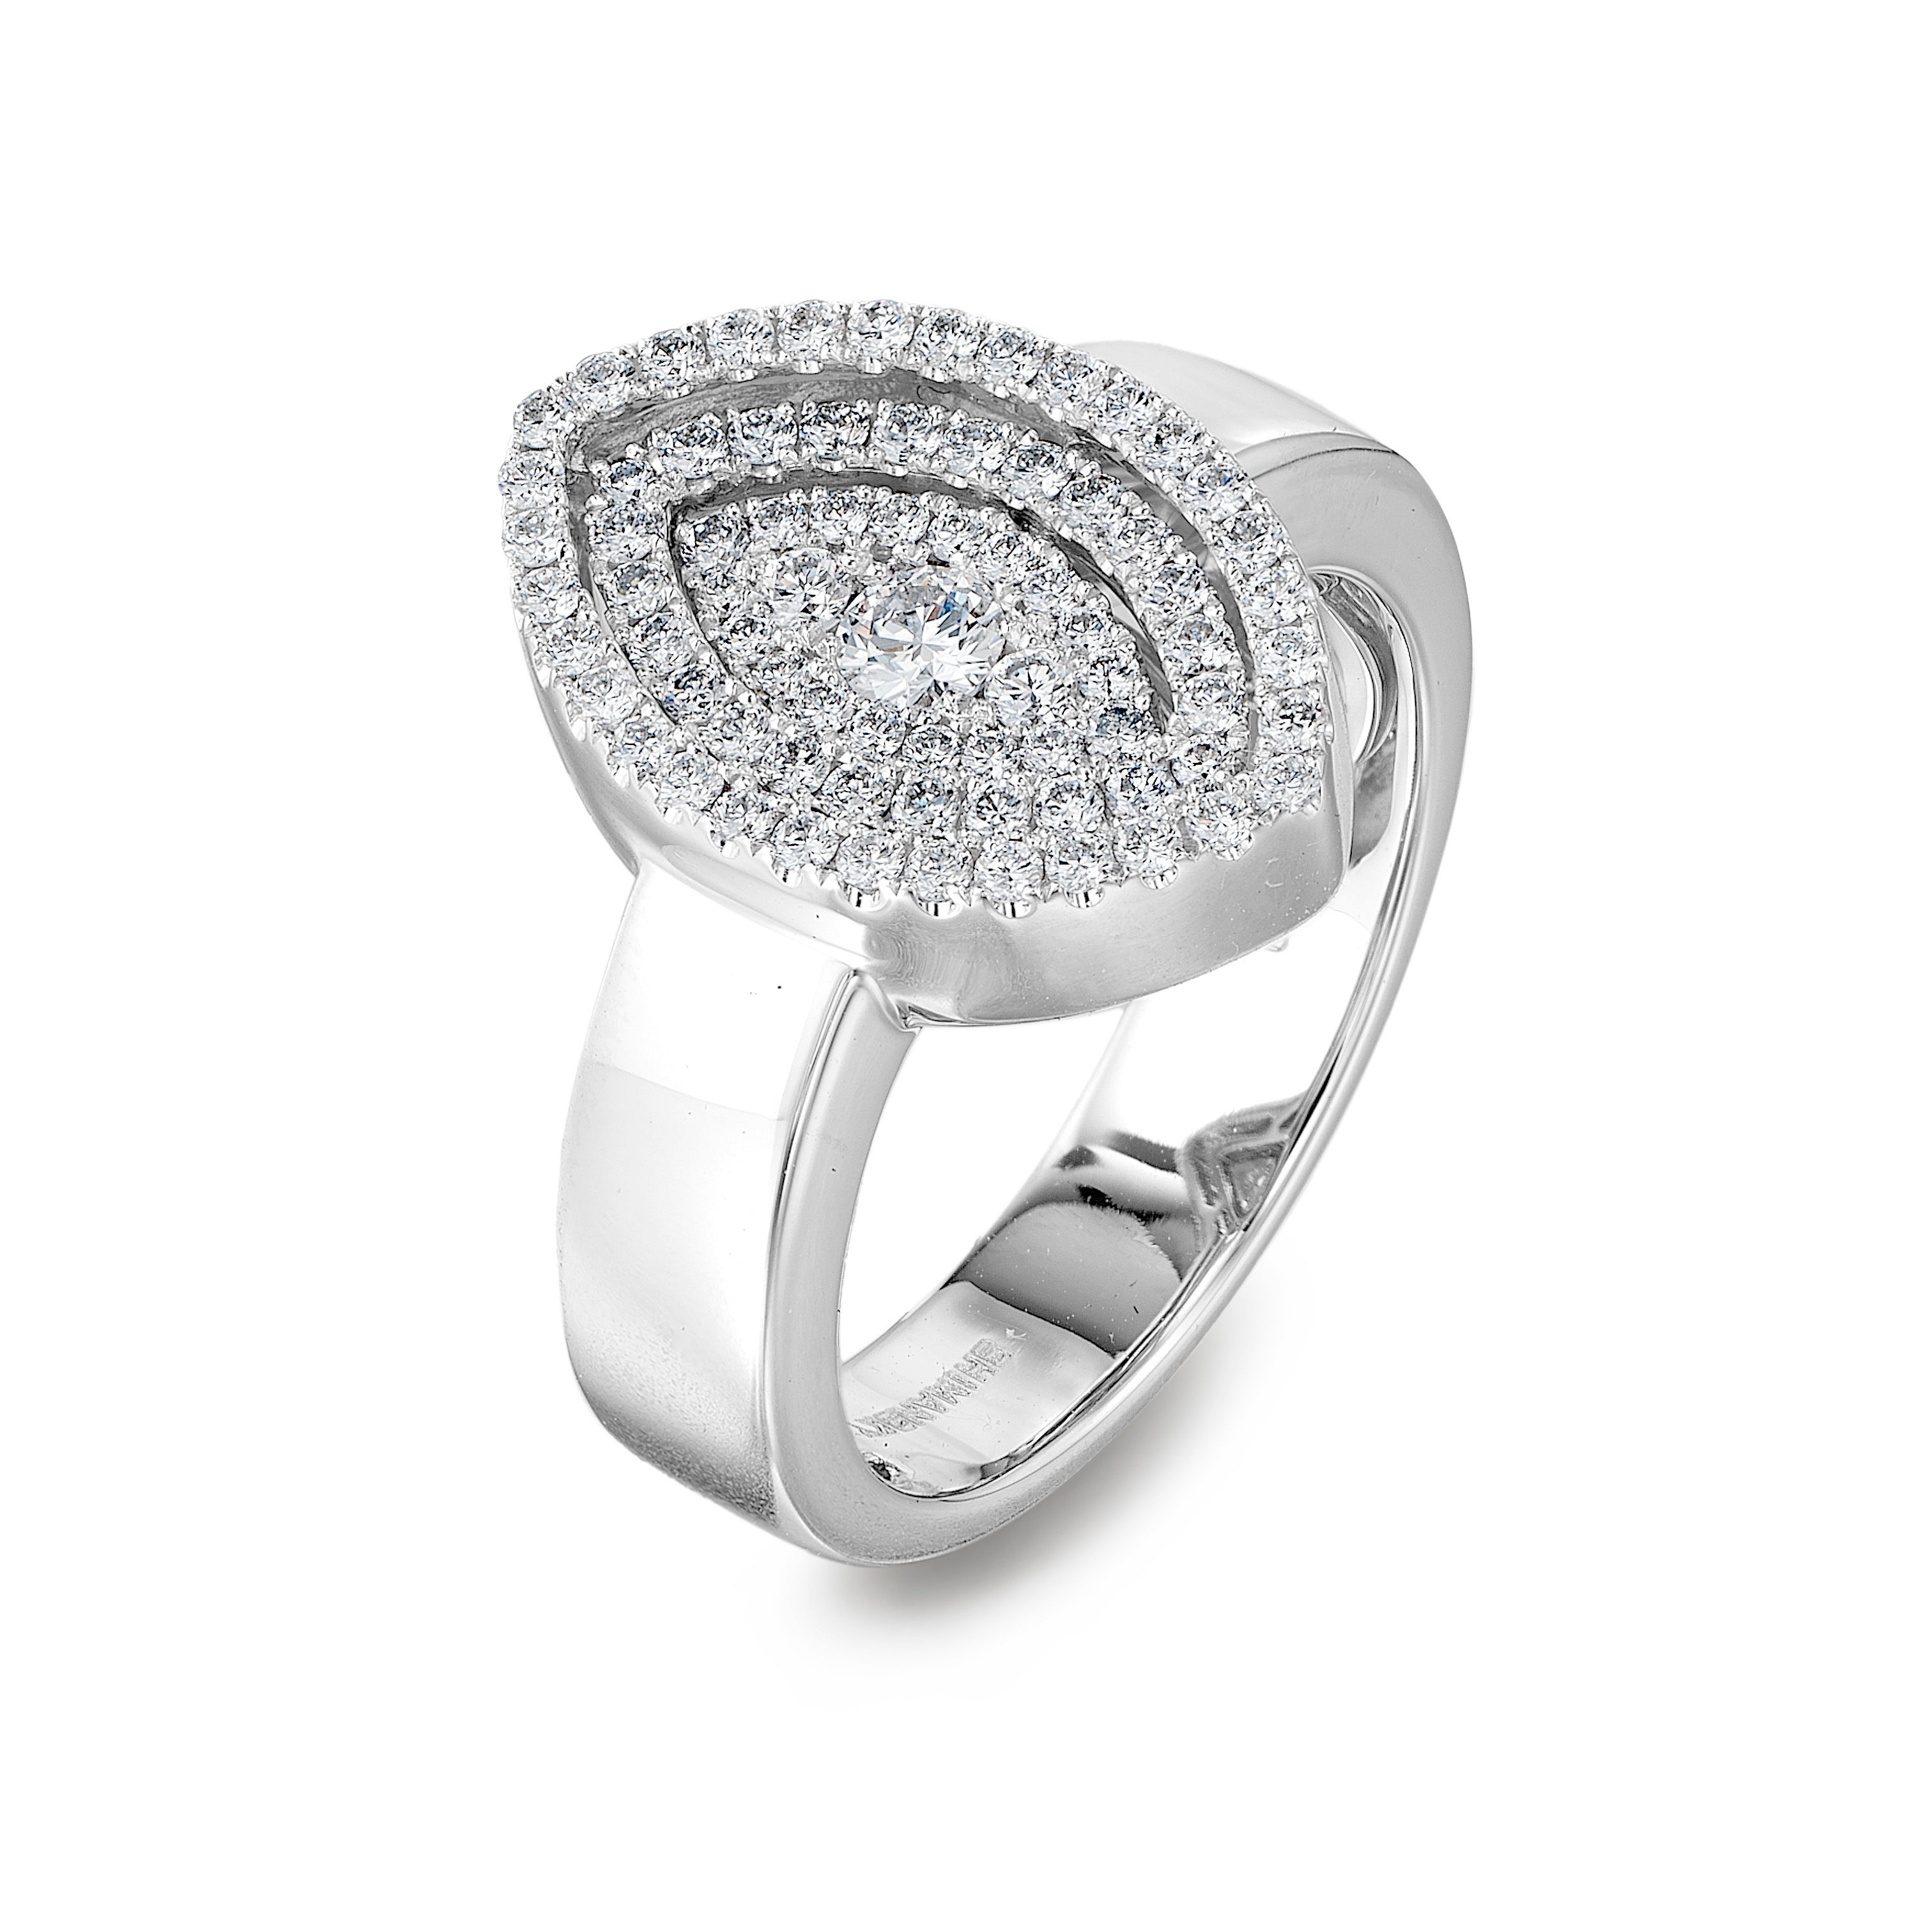 Shimansky - Starlight Diamond Marques Ring 0.60ct crafted in 18K White Gold